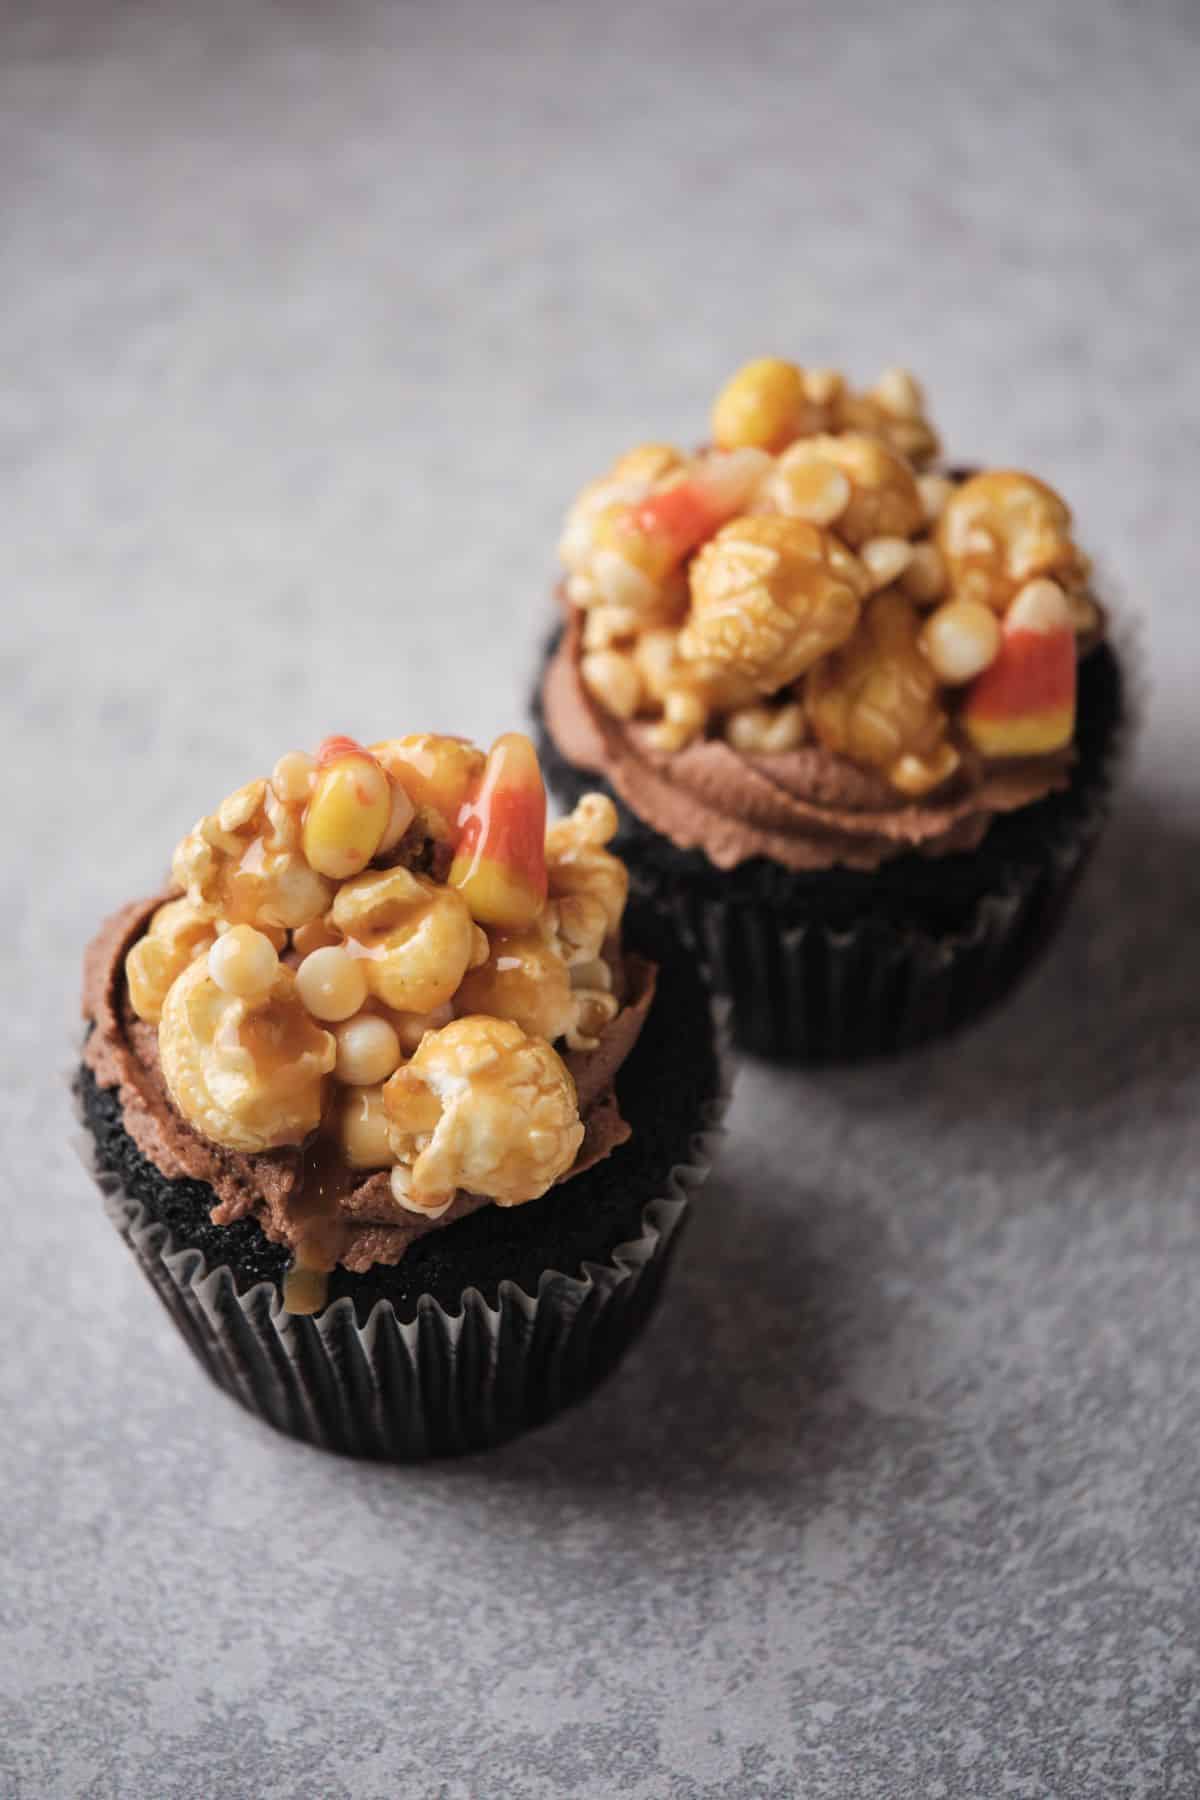 Two Caramel-filled cupcakes topped with caramel corn.